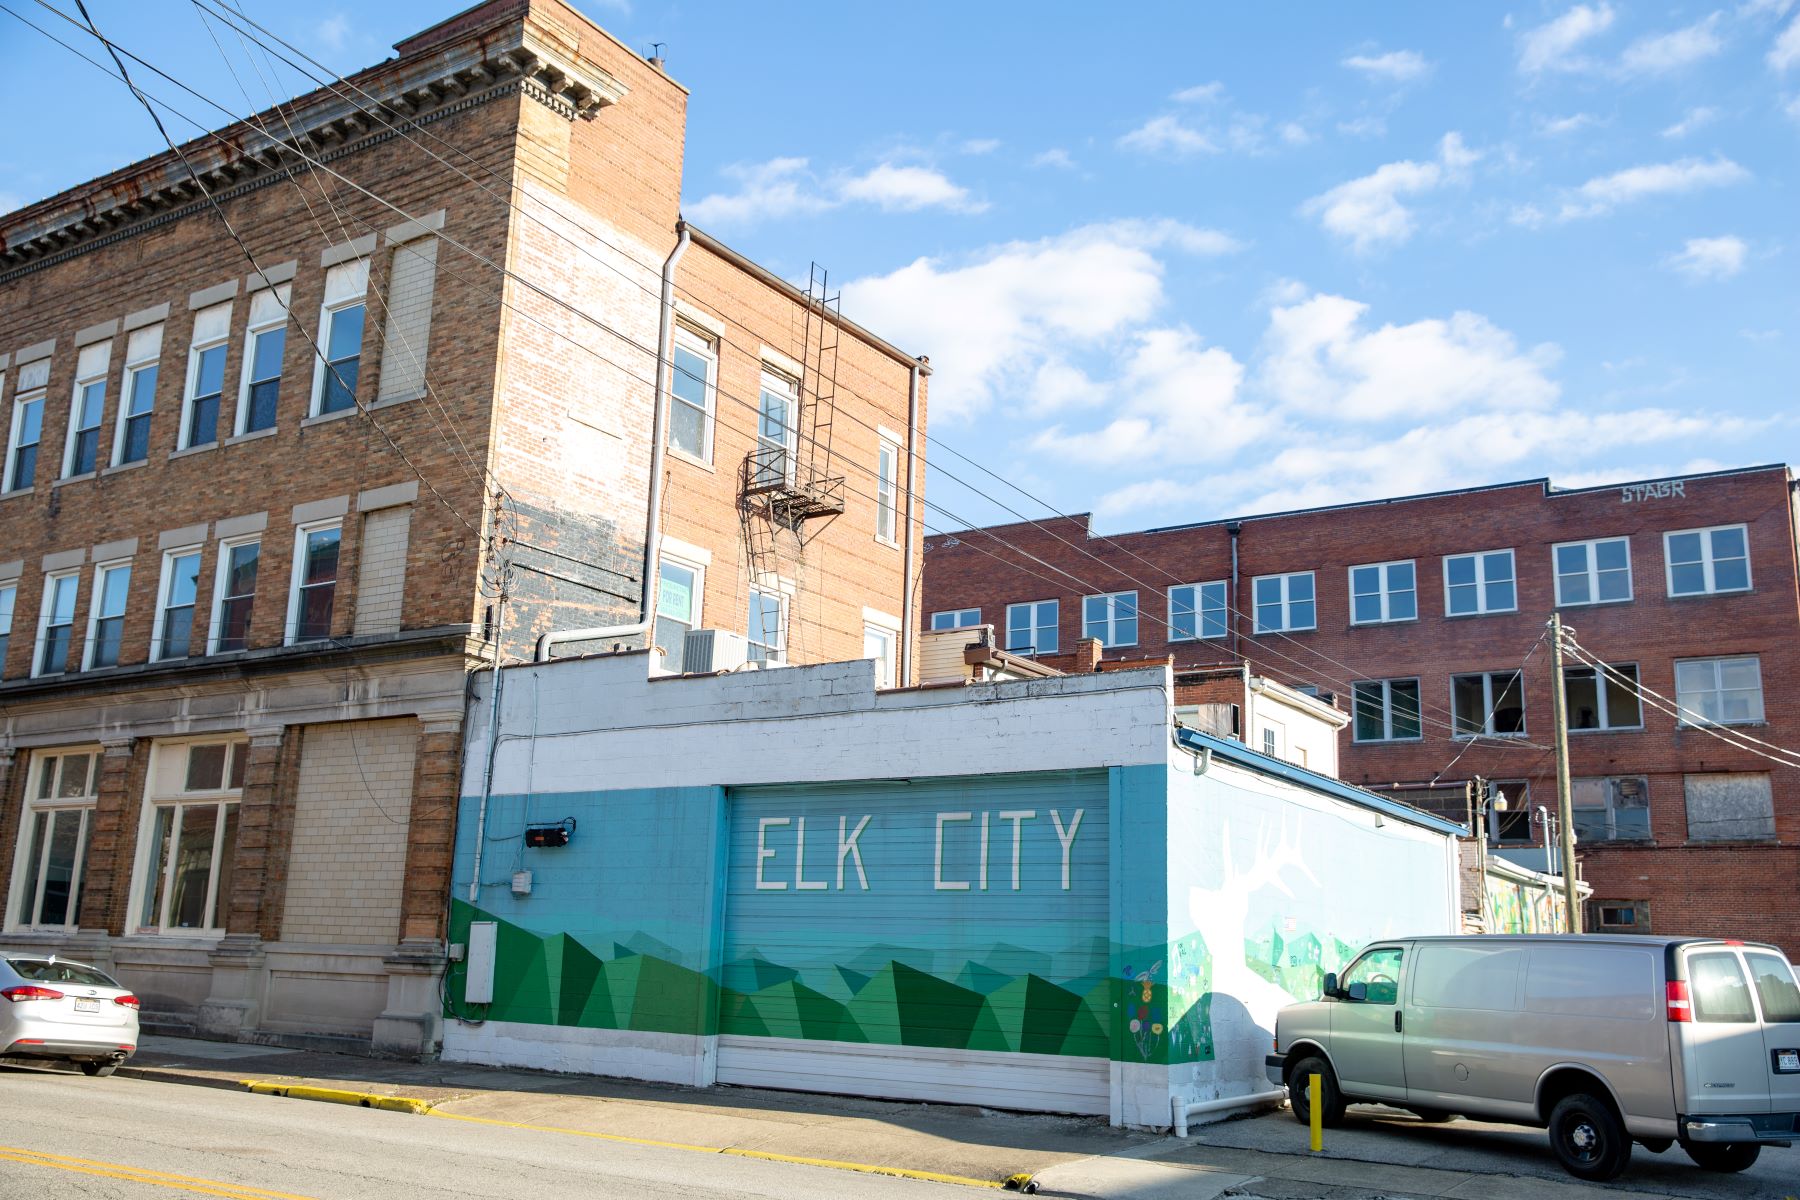 "Elk City" mural on downtown building, next to another under-utilized building